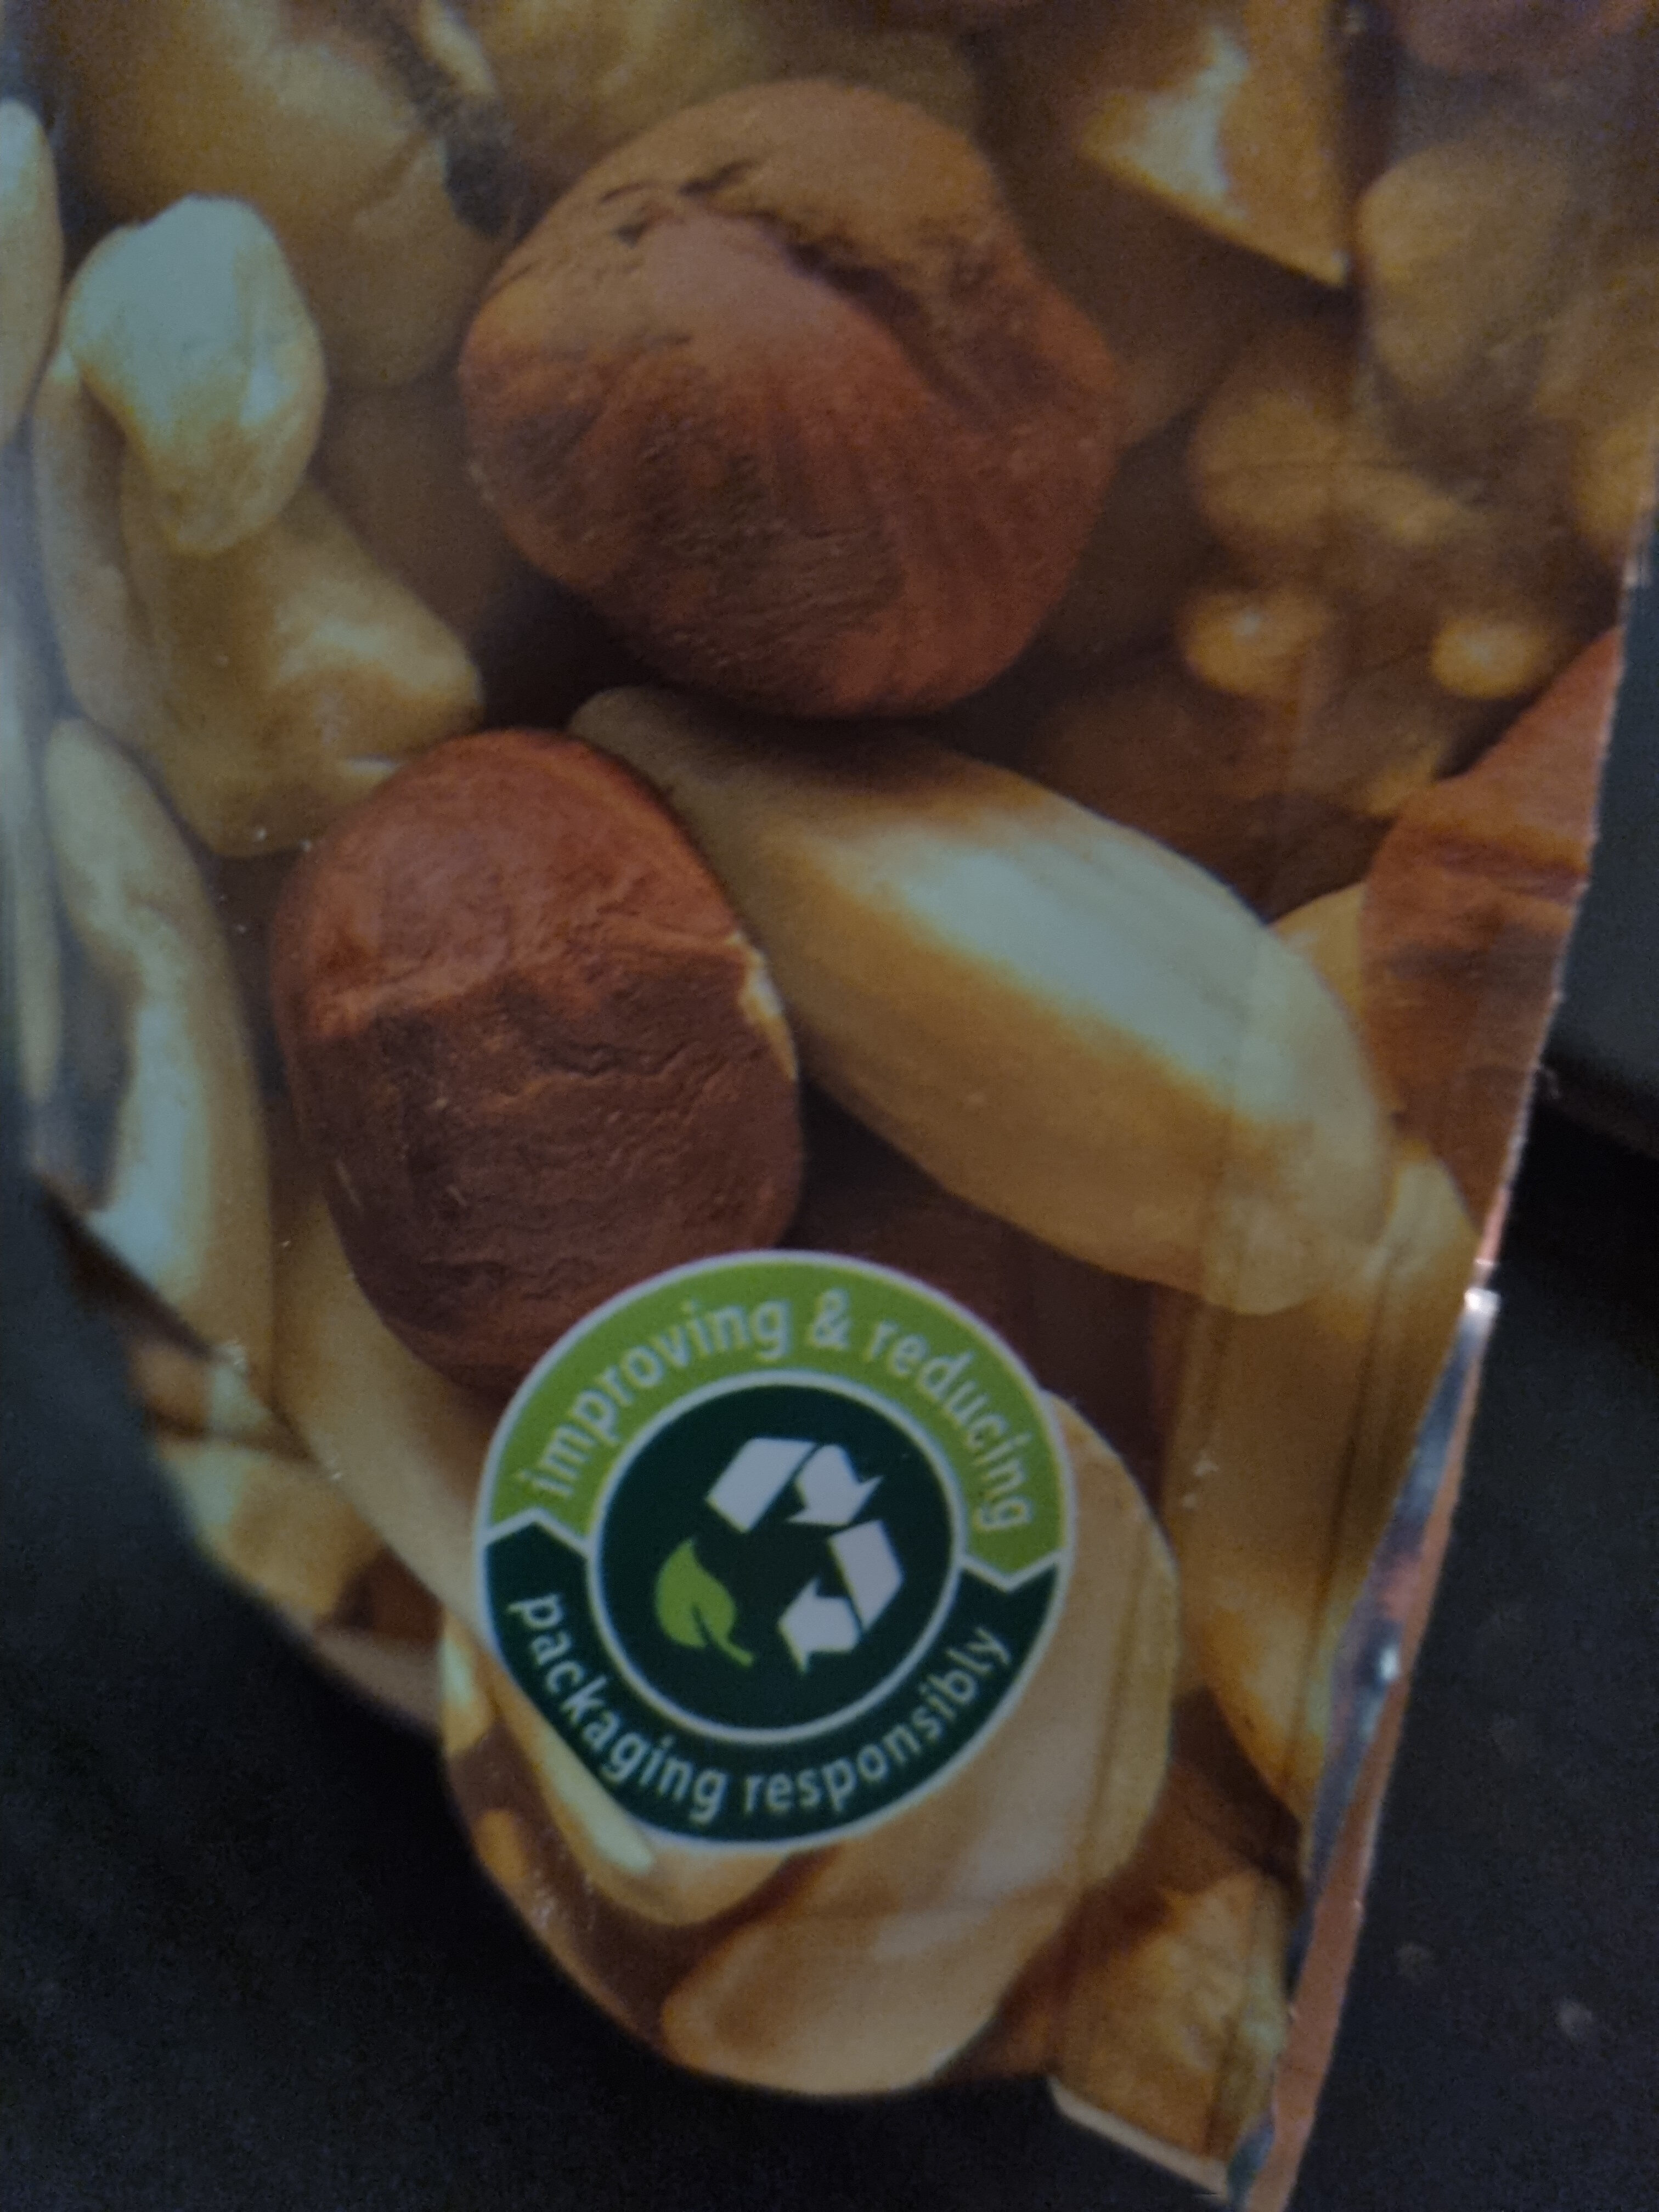 Veganer Kokosmilch Reis - Recycling instructions and/or packaging information